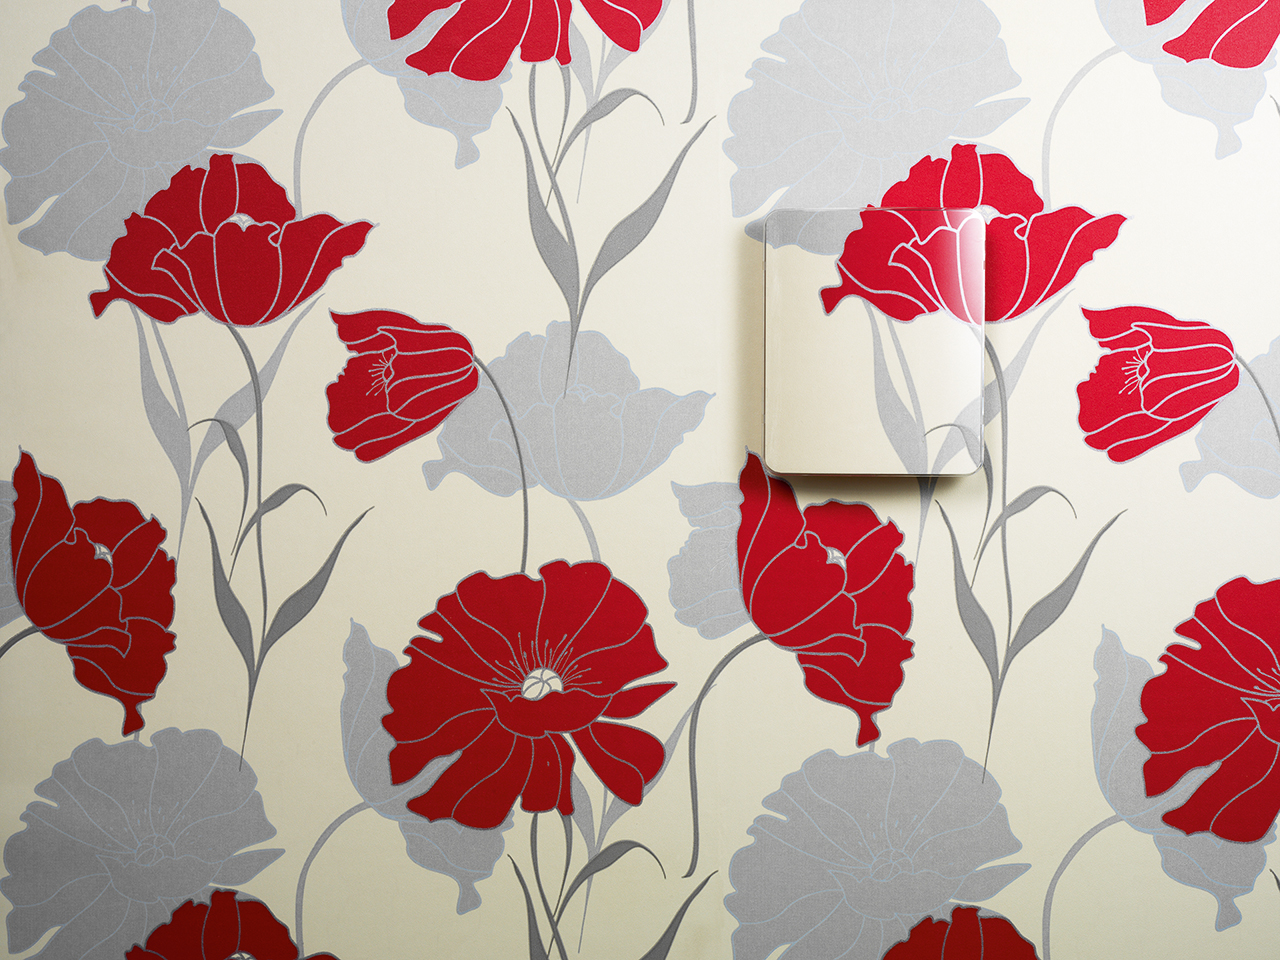 An example of a decorative cover for GMW90 and HMW90 with wallpaper